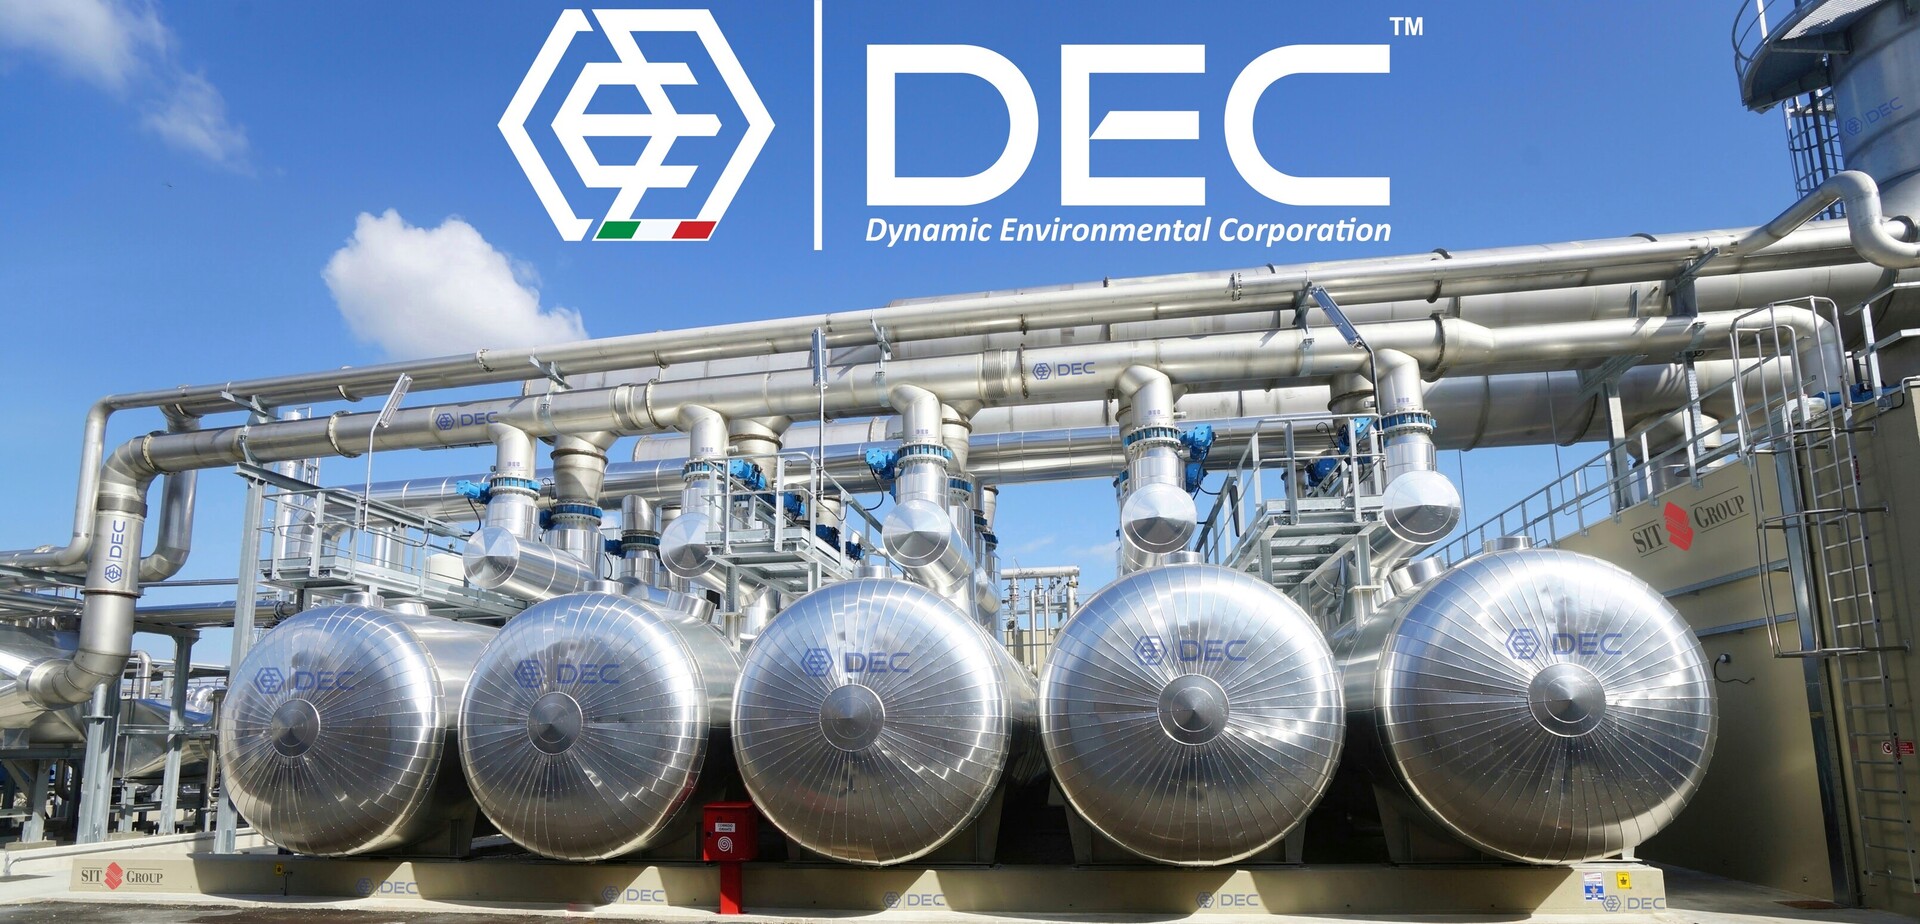 DEC, DEC IMPIANTI, DEC HOLDING, DEC SERVICE, DEC ENGINEERING, DEC AUTOMATION, DEC LAB, DEC ANALYTICS, SRU, SRS, SRP, Solvent Recovery Unit, Solvent Recovery System, Solvent Recovery Plant, SMS, Smart Modular System, CBS, Custom Built System, DEC.ULE, ULE, Ultra Low emission, Ultra Low VOC emission, solvent recovery, VOC emission control, solvent recovery, VOC recovery, VOC abatement, VOC emission control technology, VOC abatement systems, air pollution control, solvent recovery systems, environmental compliance, VOC recovery system, solvent recovery unit, VOC recovery equipment, BAT, Best Available Technique, BREF, IED, Industrial Emissions Directive, solvent recovery equipment, solvent recycling, VOC capture, solvent reclamation, solvent purification, VOC treatment, solvent regeneration, distillation, solvent distillation, VOC recovery process, activated carbon, adsorbent, nitrogen, oxidizer, thermal oxidation, regenerative thermal oxidizer, LEL monitoring, solvent recovery for flexible packaging, flexible packaging, converting, engineering, supply, turnkey, sustainable, innovation, decarbonization, low carbon emissions, green deal, carbon reduction, low carbon, carbon neutrality, net-zero emissions, greenhouse gas mitigation, carbon footprint, carbon capture and storage (CCS), GHG, CO2, energy efficiency, chemical recycling, recycling, sustainability solutions, sustainability, reclaiming, carbon offset, circular economy, climate change, climate policy, climate action, environmental challenges, sustainable development, sustainability roadmap, ESG, TBL